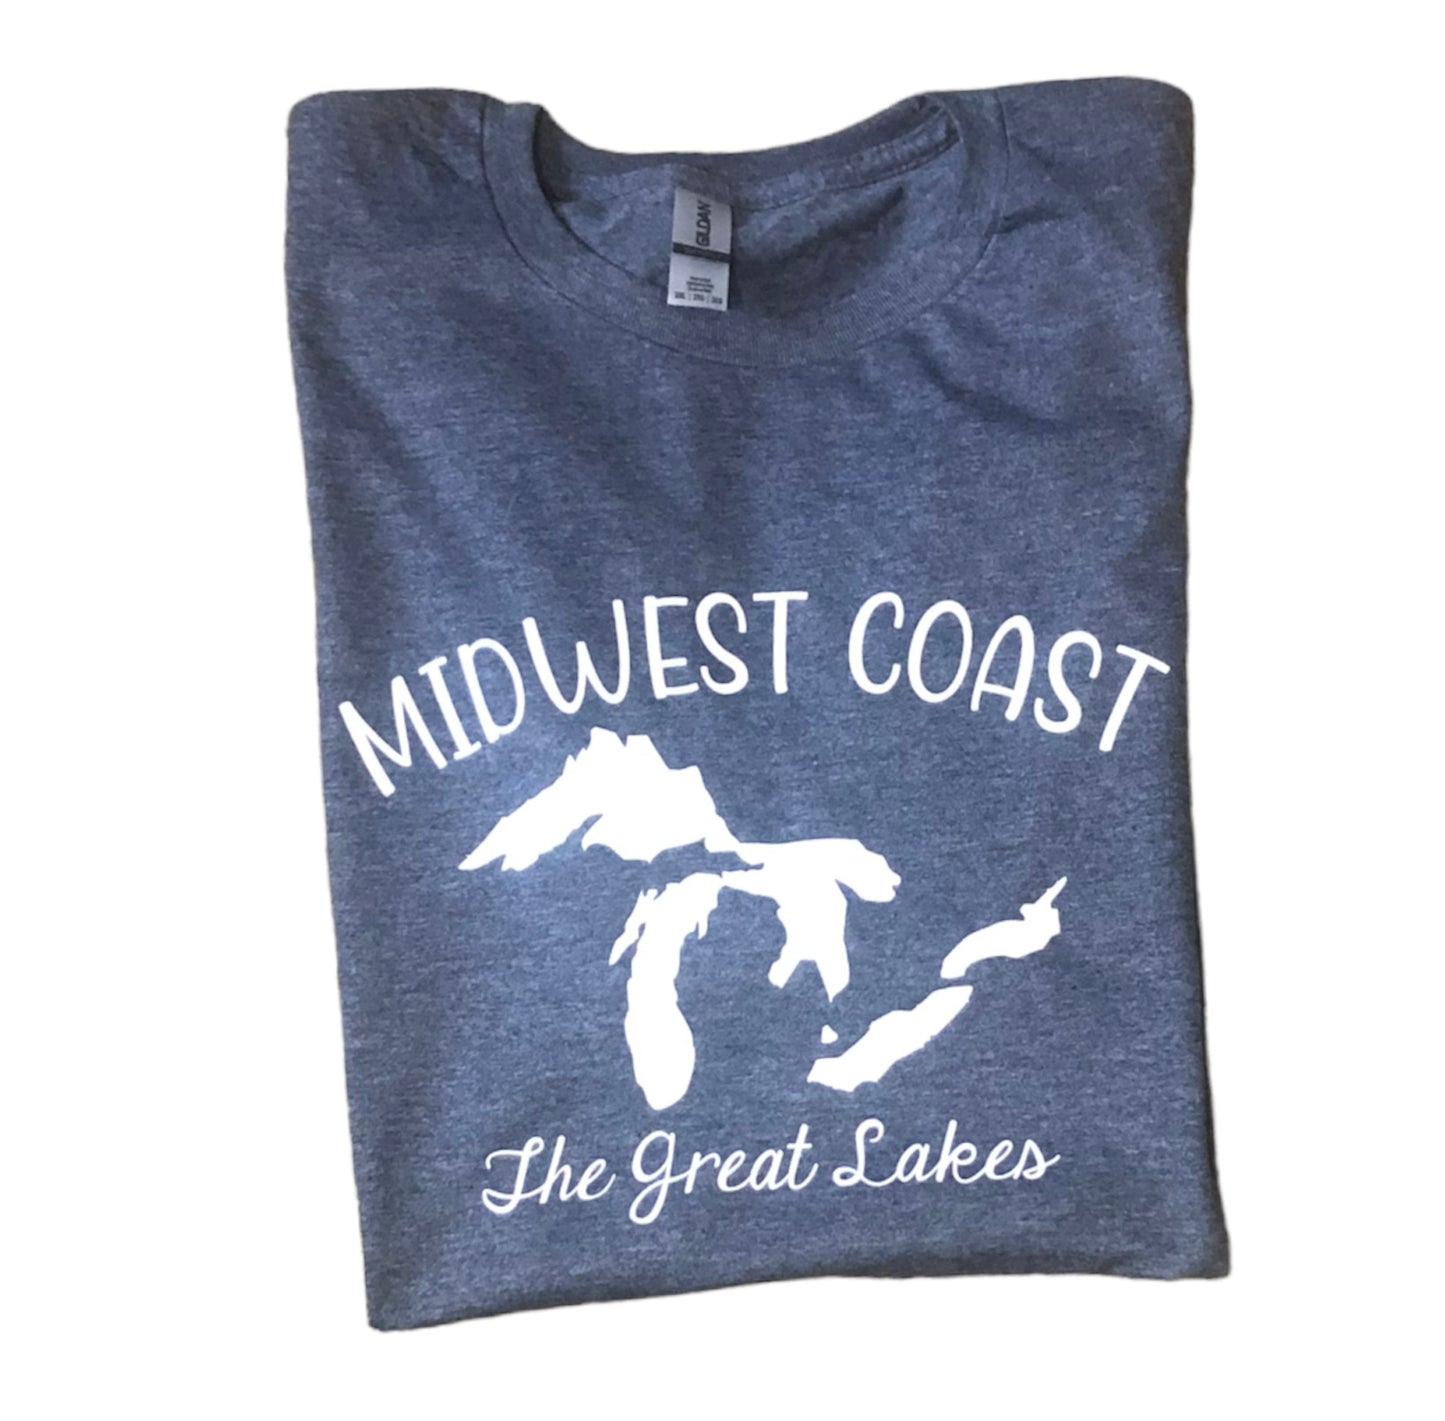 Midwest Coast The Great Lakes Tee Shirt